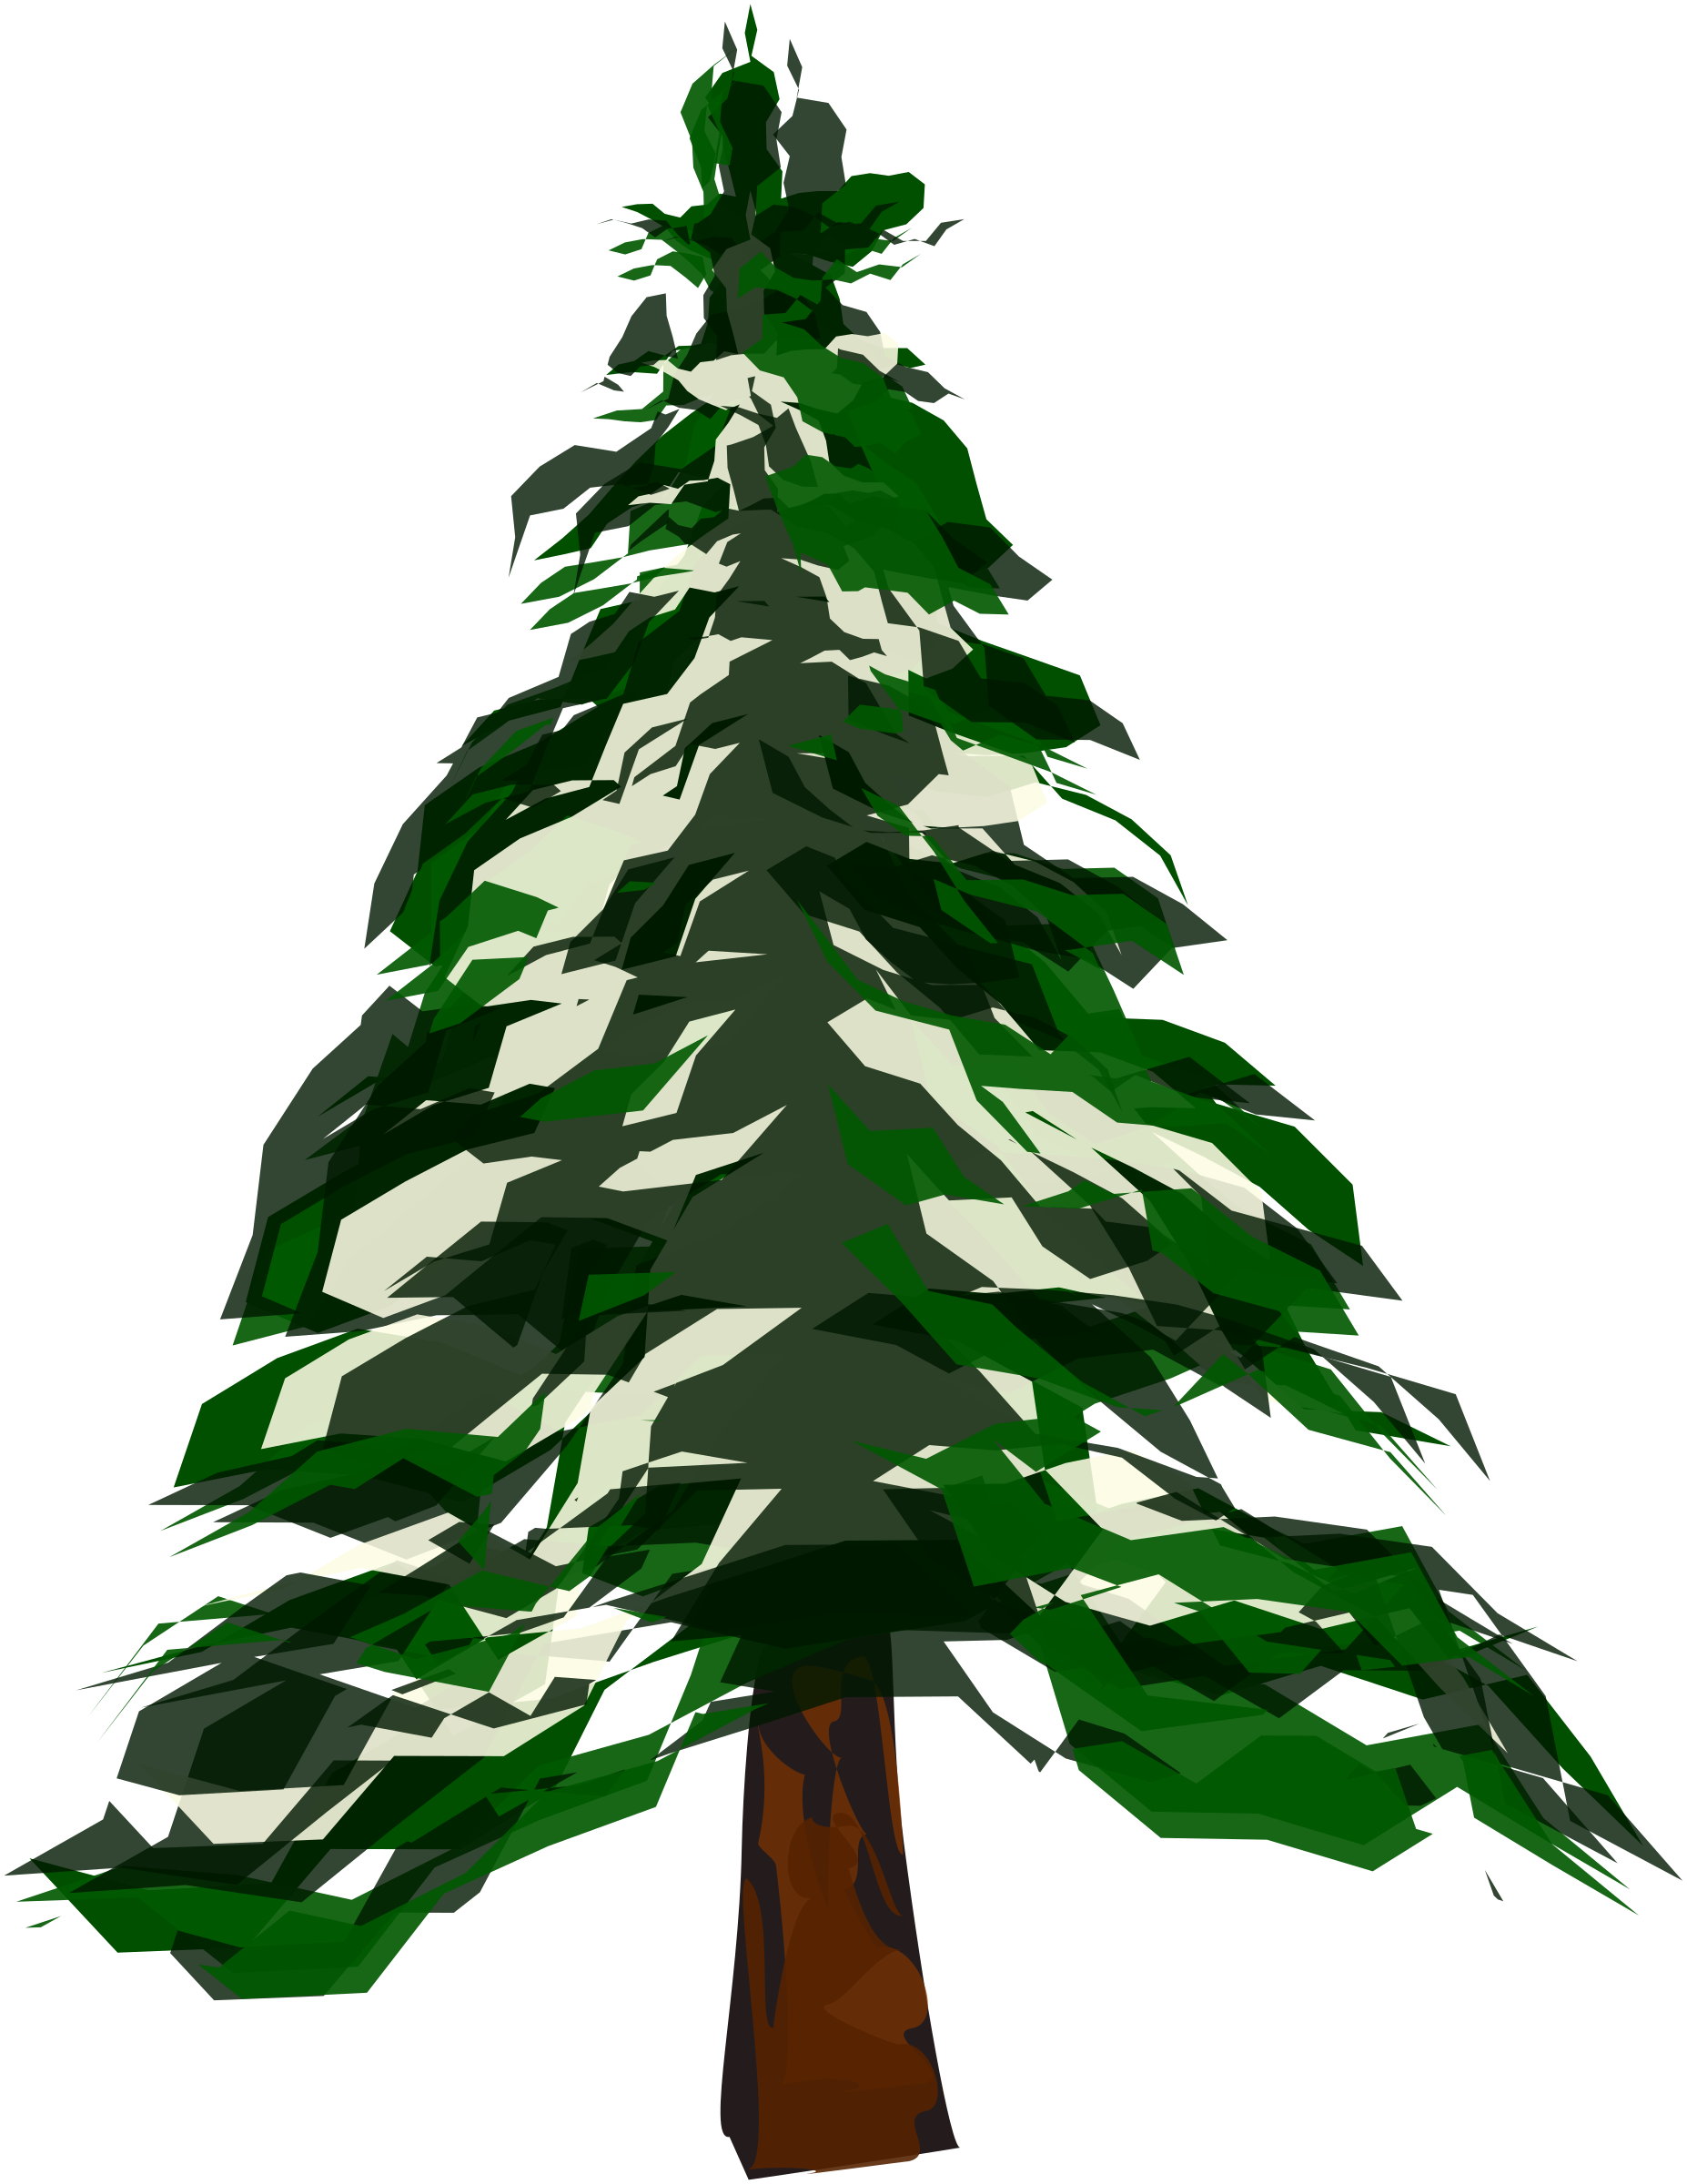 Plants clipart winter. Tree big image png